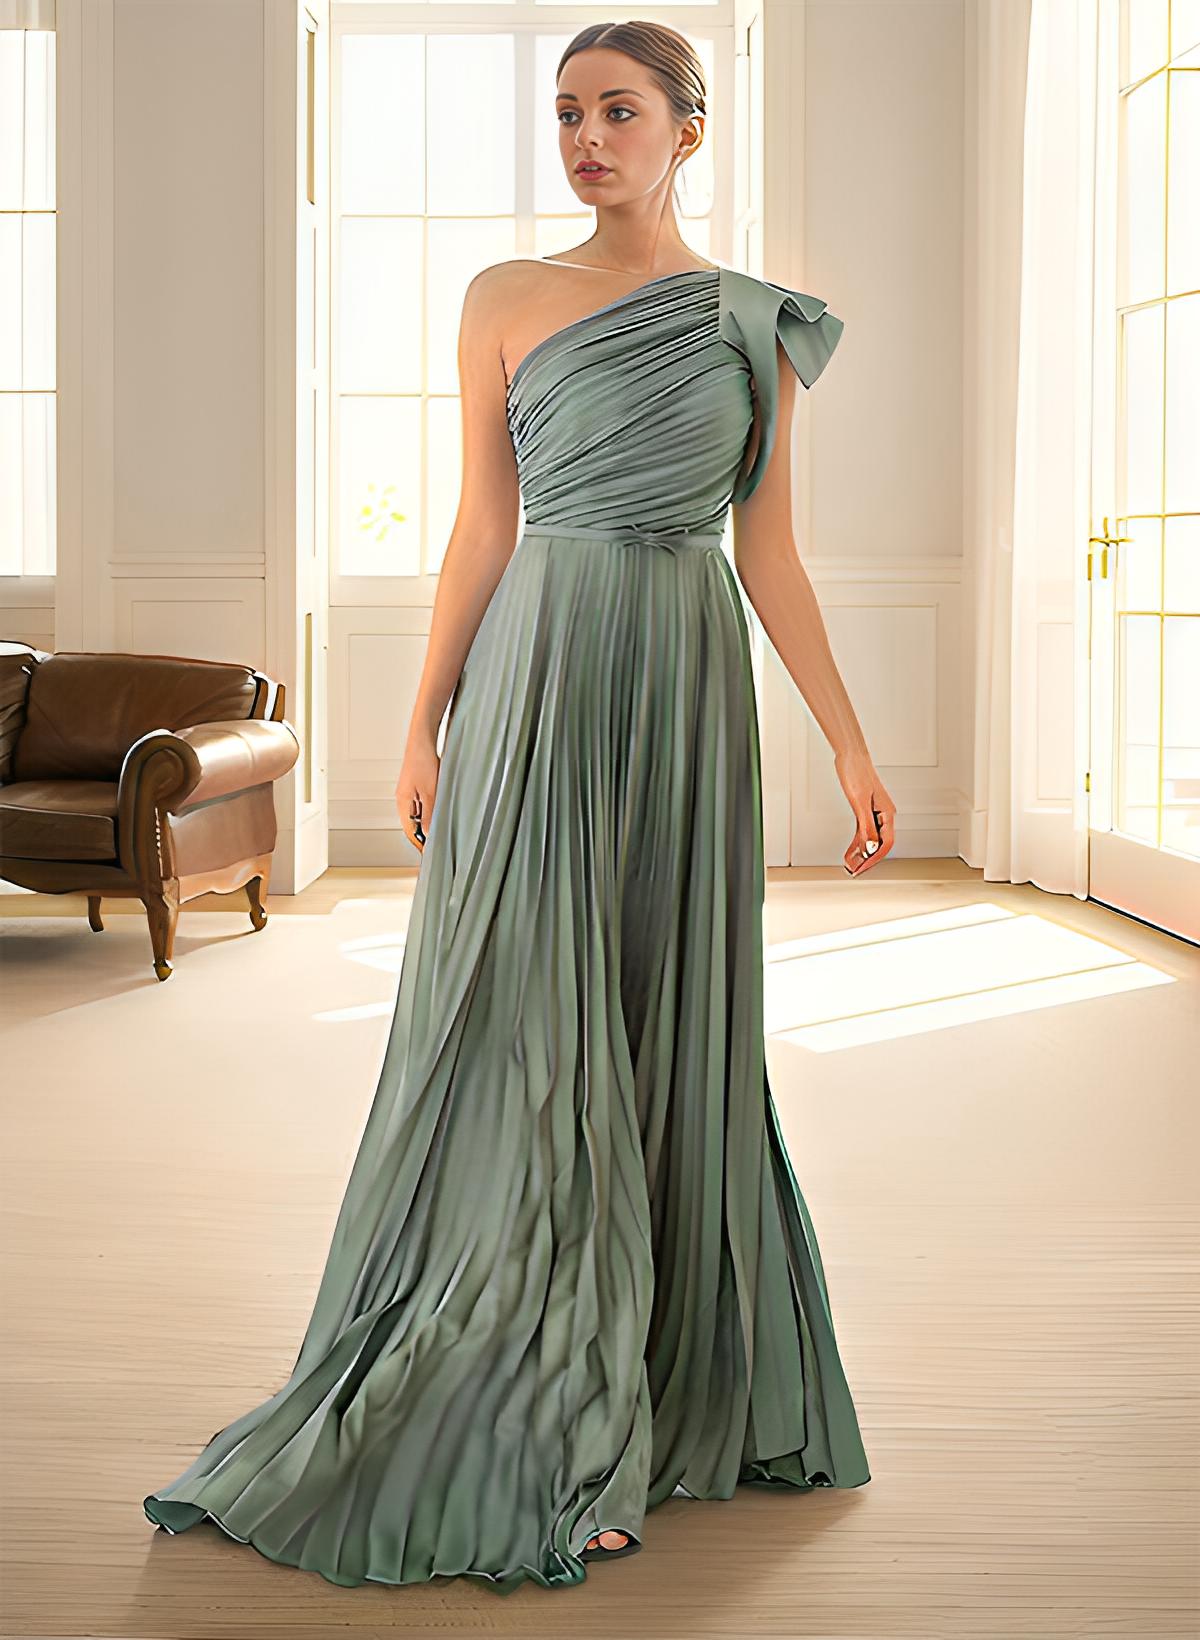 Elegant Pleated One-Shoulder Sleeveless Floor-Length Mother Of The Bride Dresses With Pleated